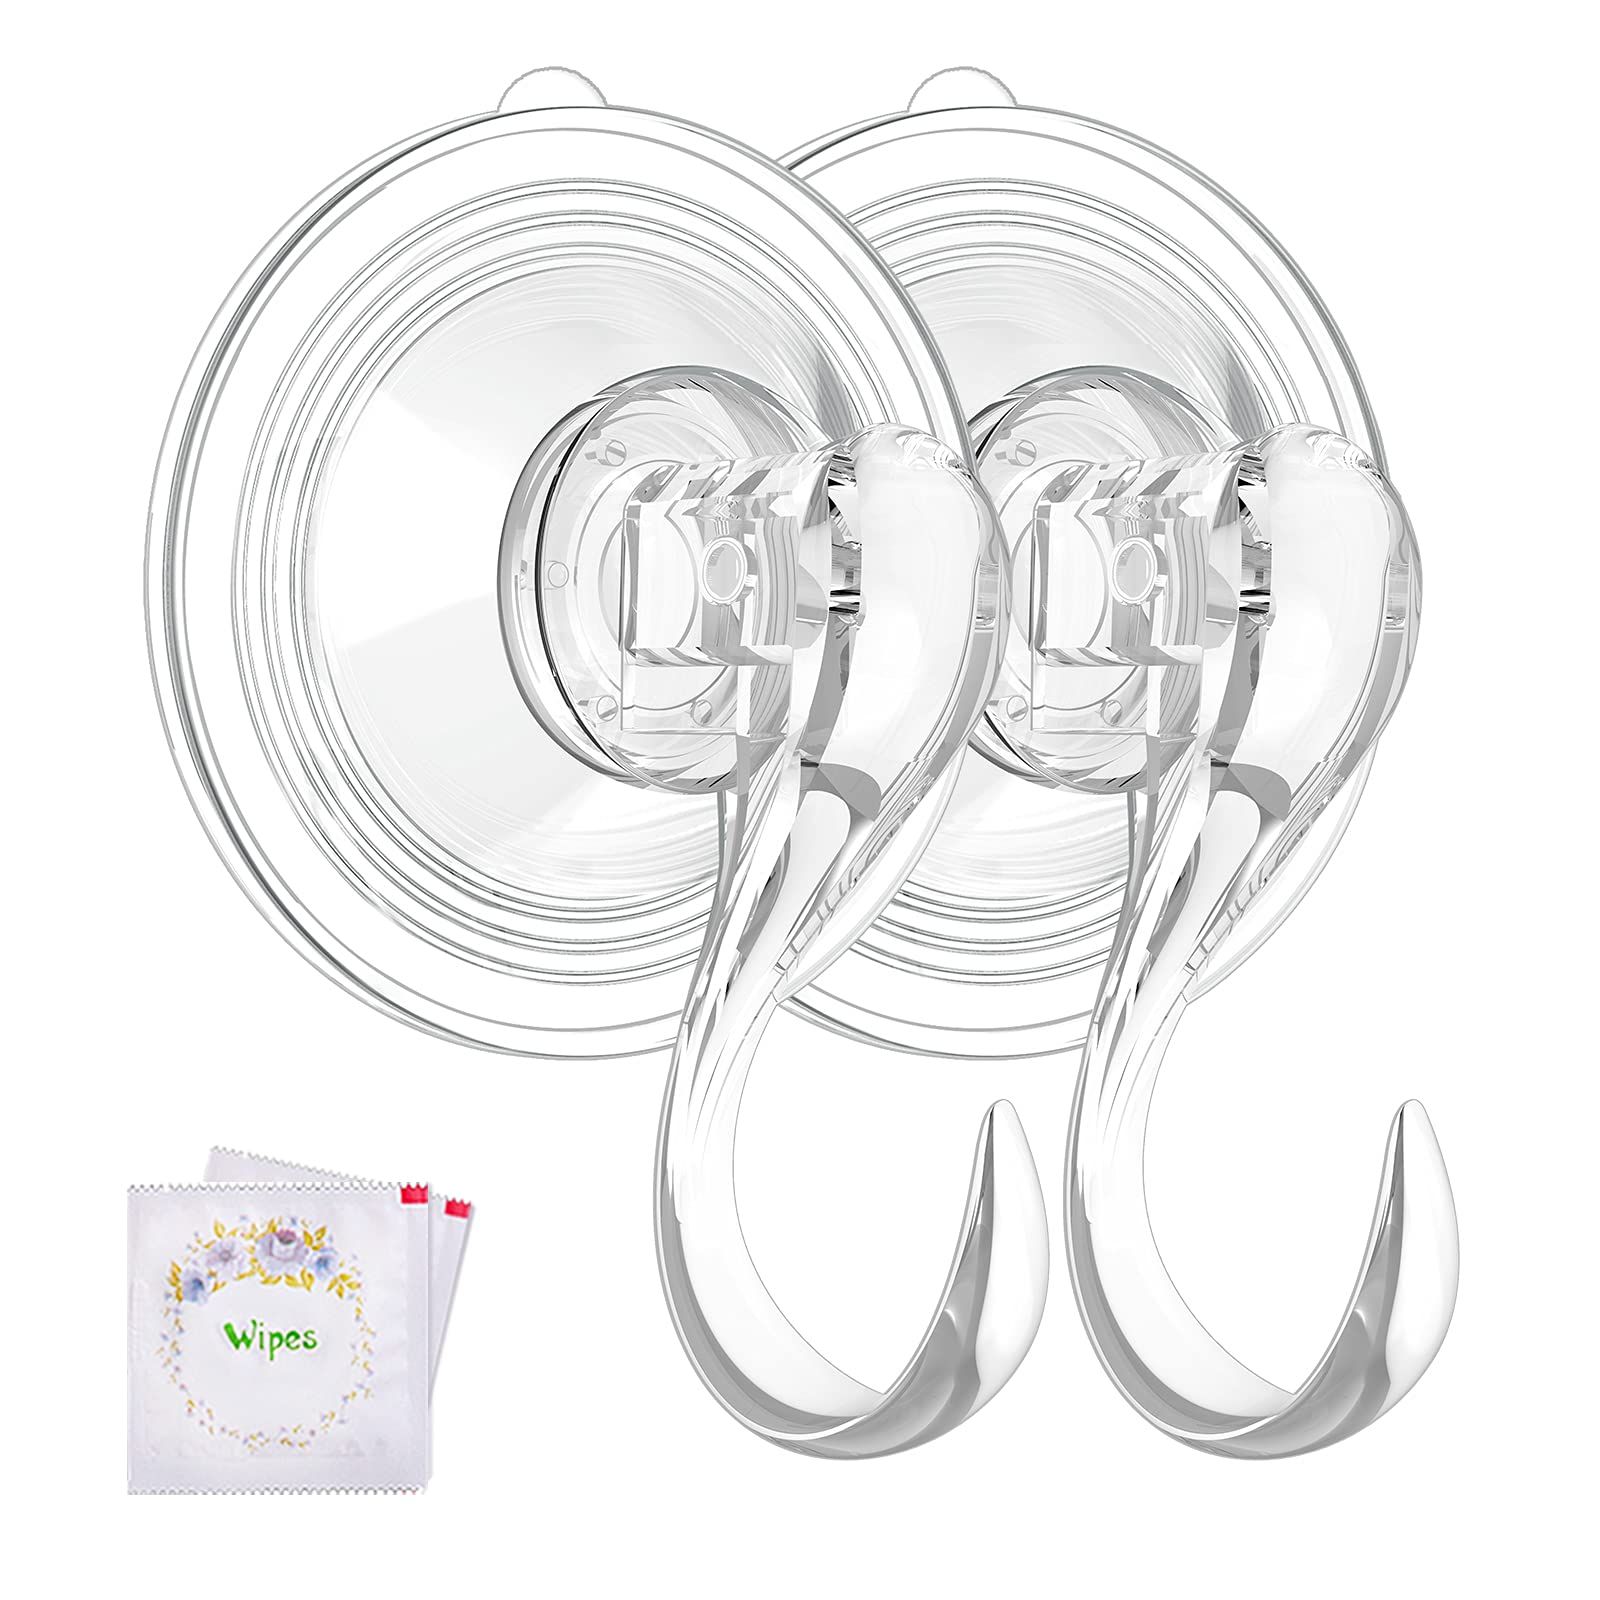 Wreath Hanger, VIS'V Large Clear Removable Heavy Duty Suction Cup Wreath Hooks with Wipes 22 LB Stro | Amazon (US)